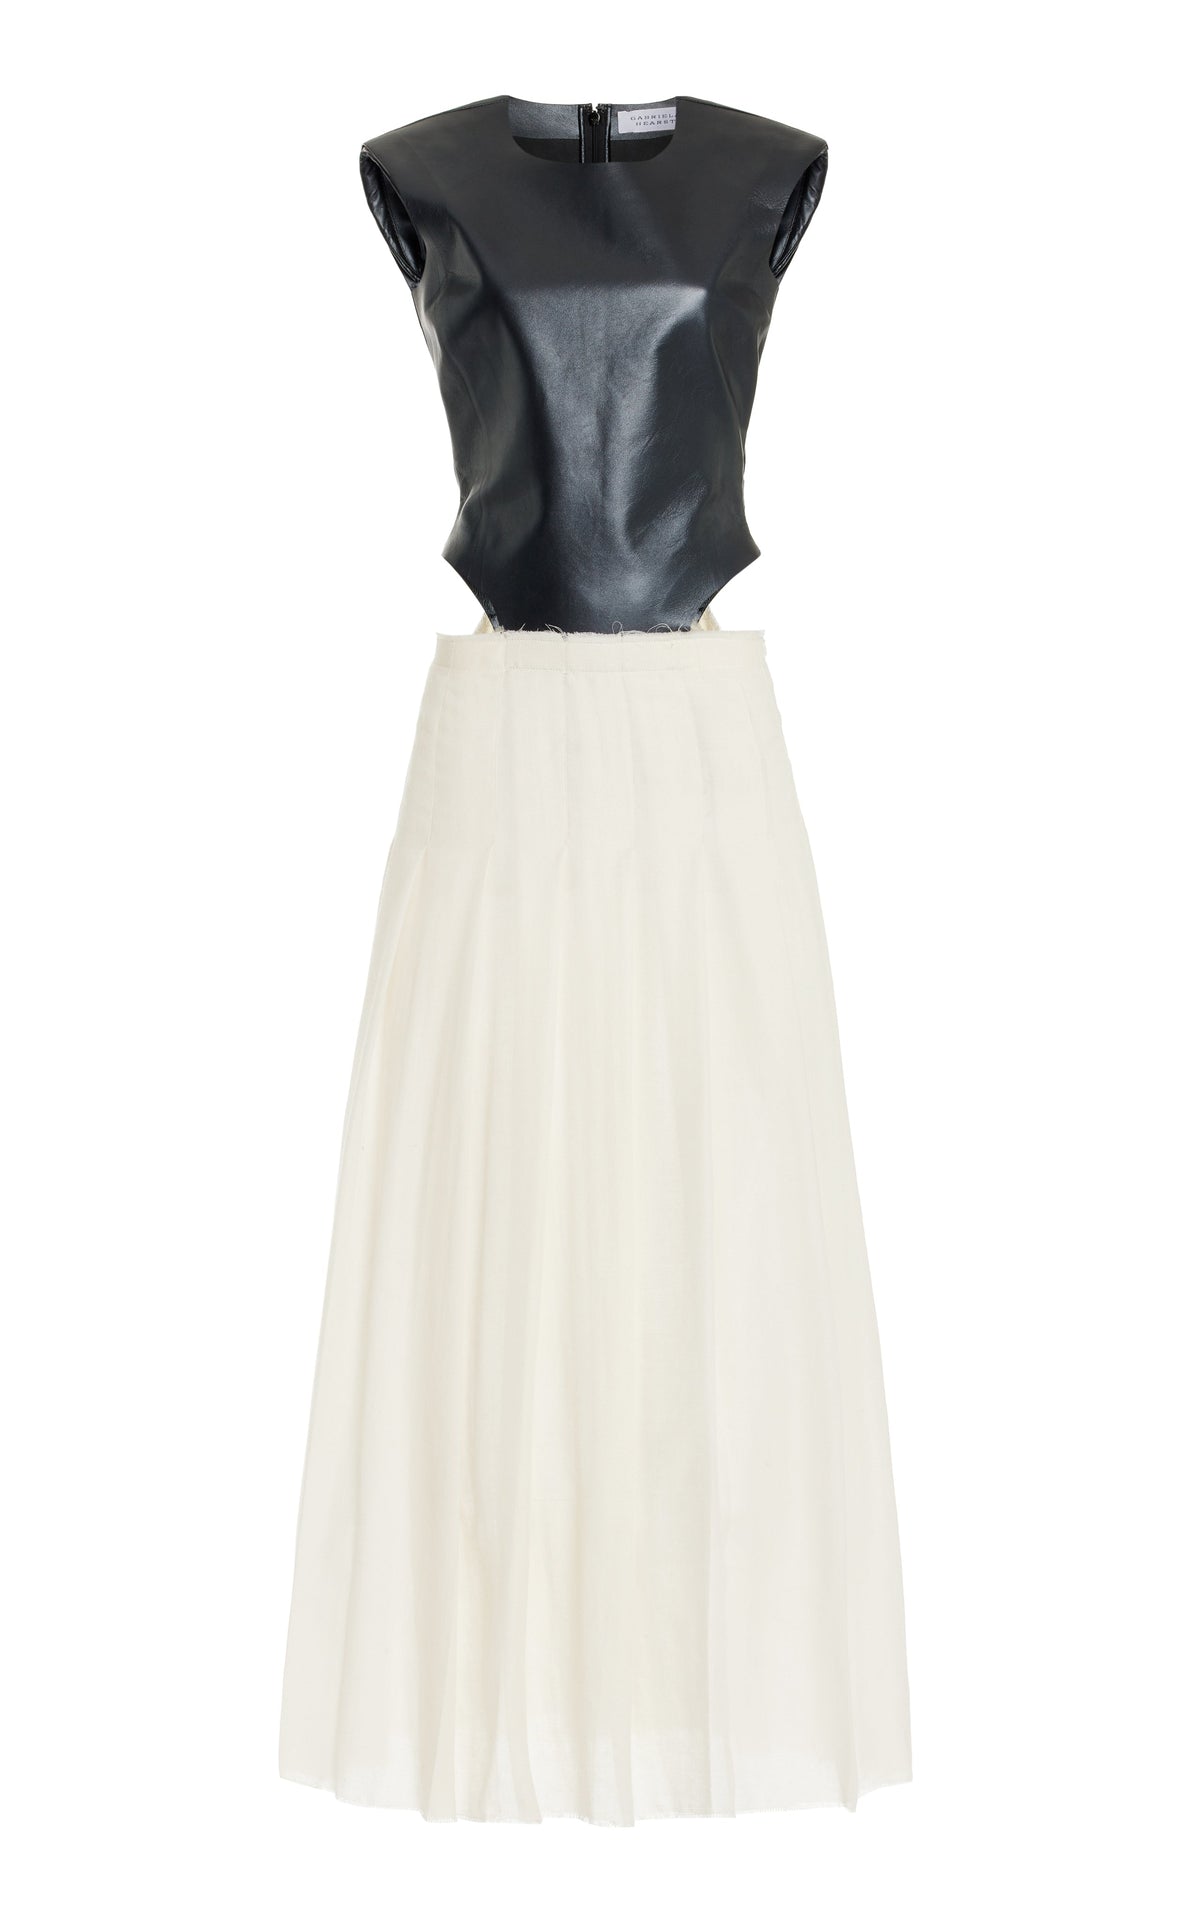 Mina Dress in Ivory Cashmere Virgin Wool with Leather Bodice